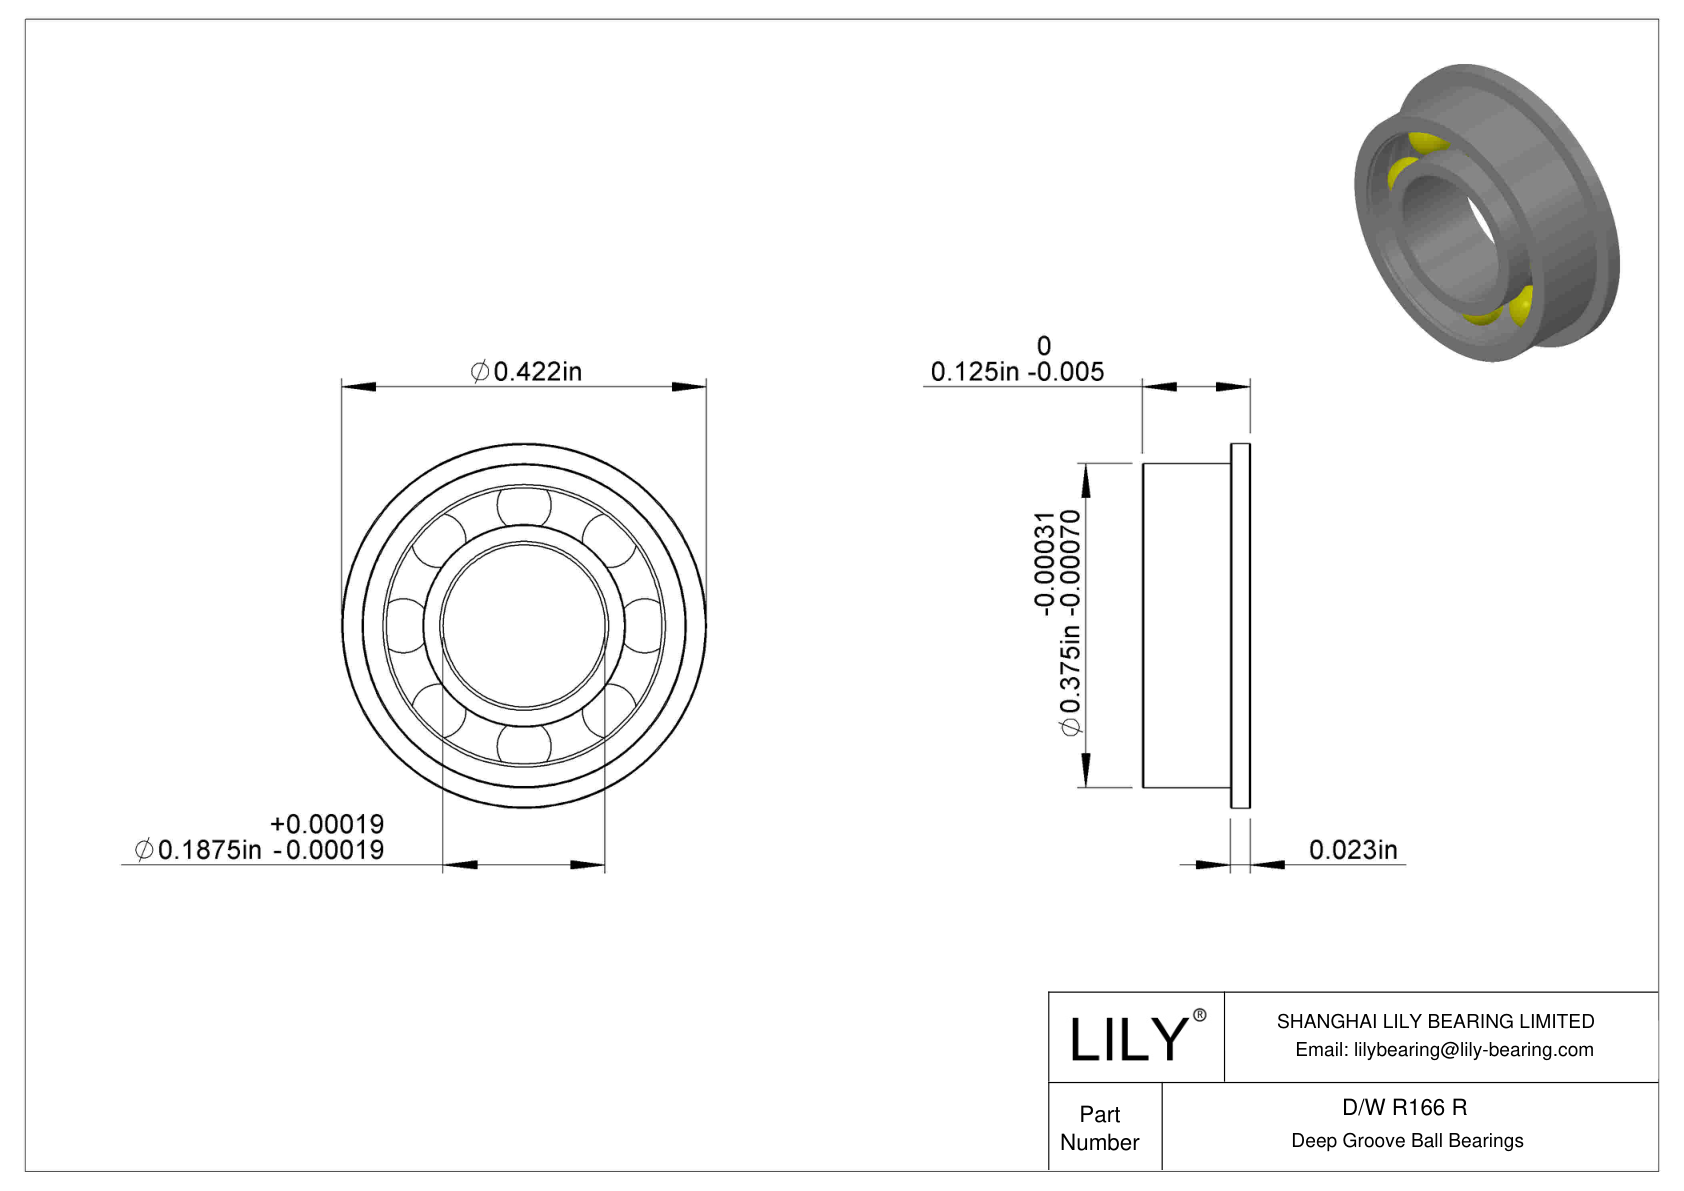 D/W R166 R Flanged Ball Bearings cad drawing